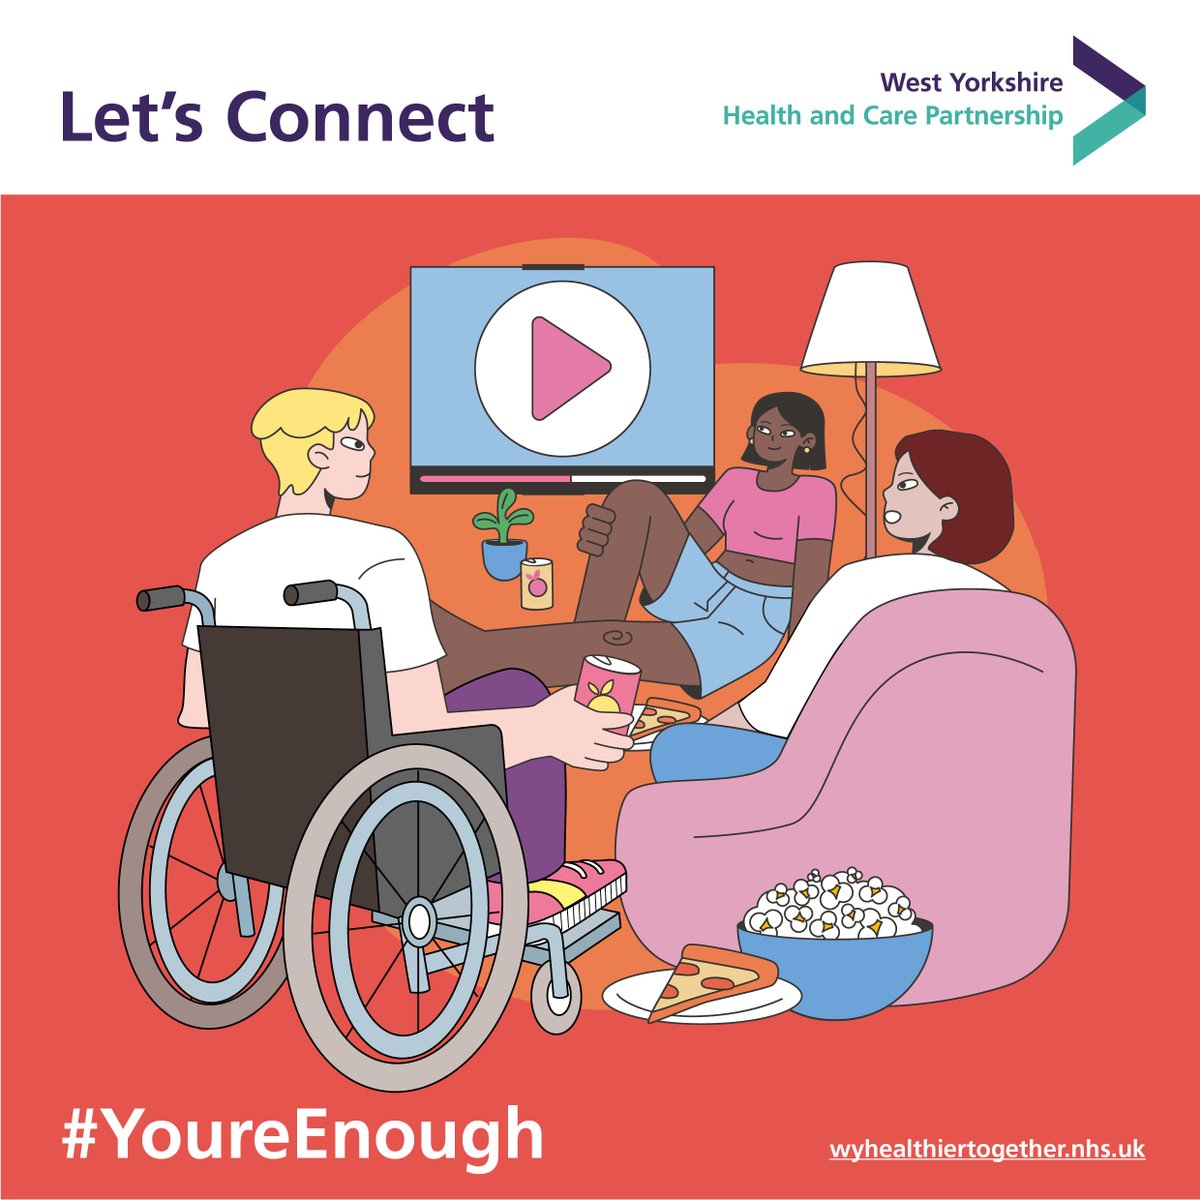 Our Partnership has launched a new campaign to support young people’s mental health. #MentalHealthAwarenessWeek Visit our website to find out more: bit.ly/3WagLMz #LetsConnect